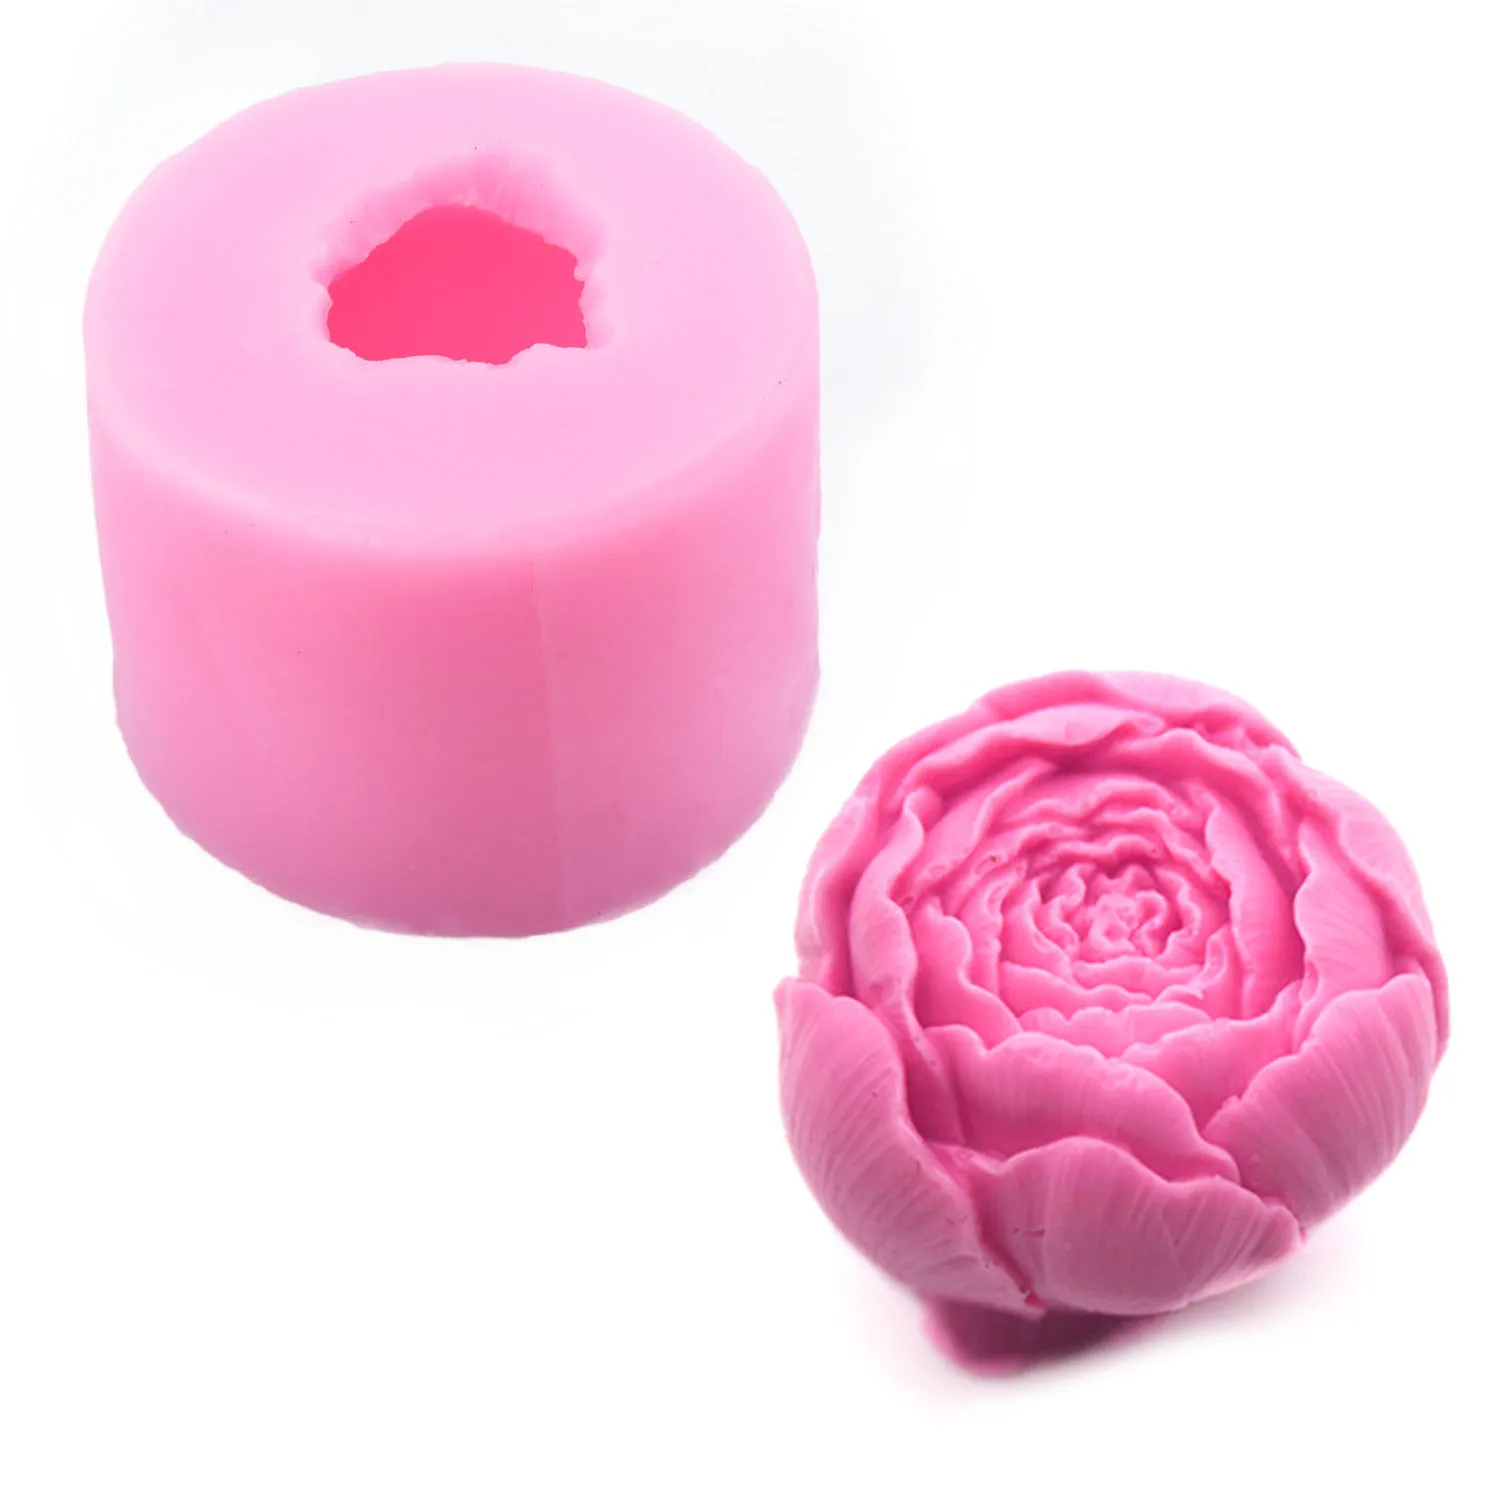 3D Rose Flower Silicone Fondant Mold Cake Decor Chocolate SELL S5R9 Mould R4S4 